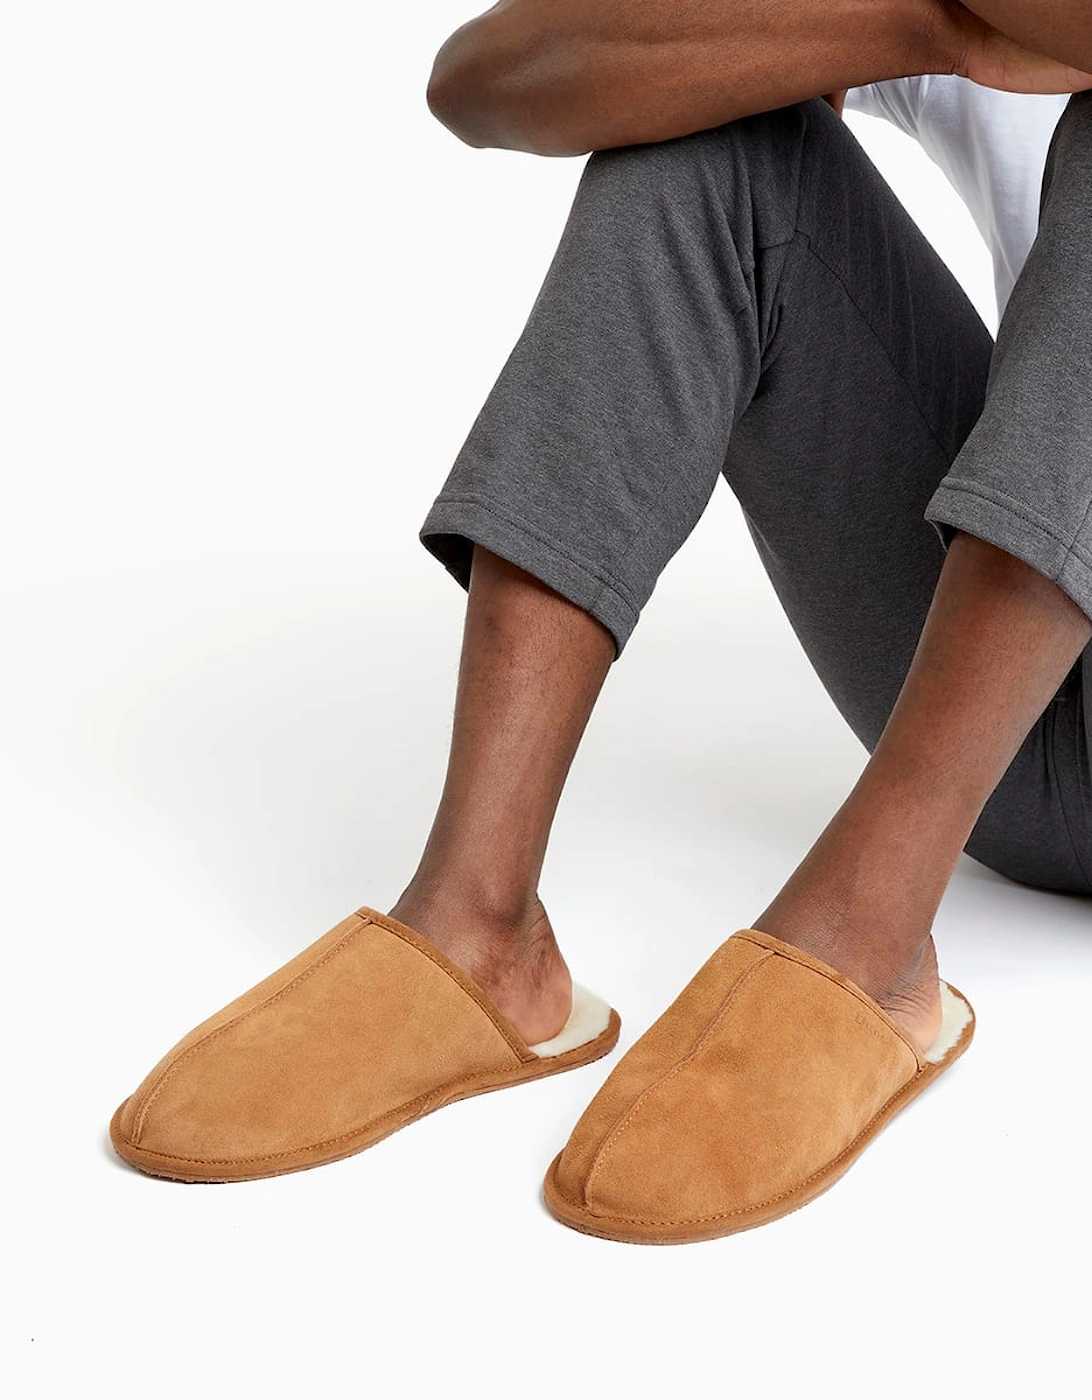 Mens Forage - Warm Lined Mule Slippers